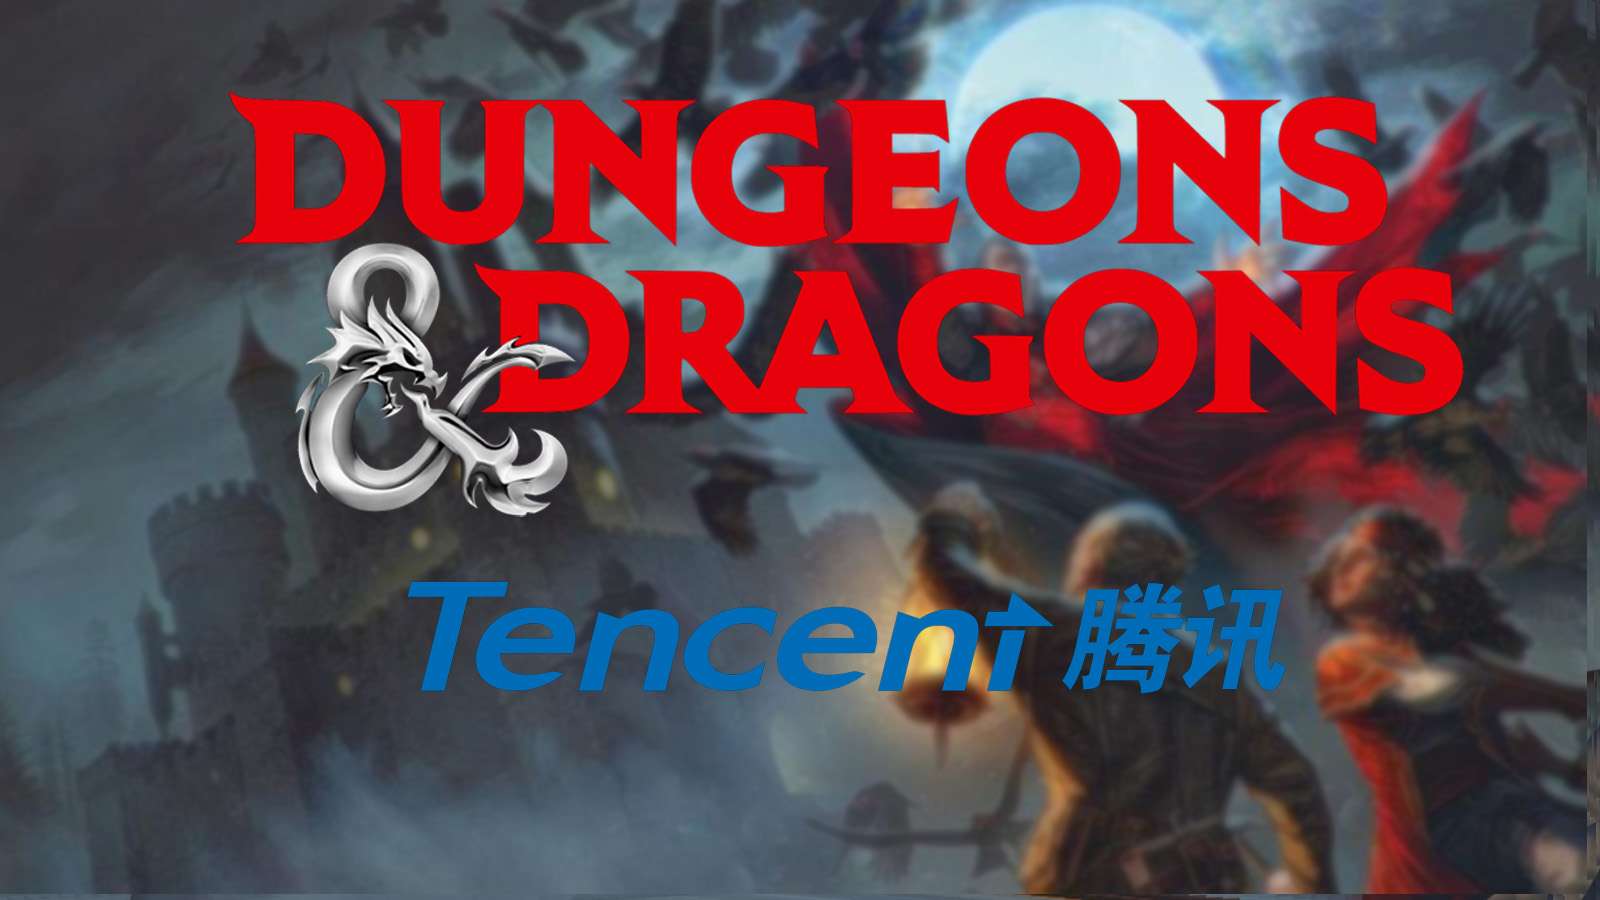 The Dungeons & Dragons and Tencent Logos over official D&D art